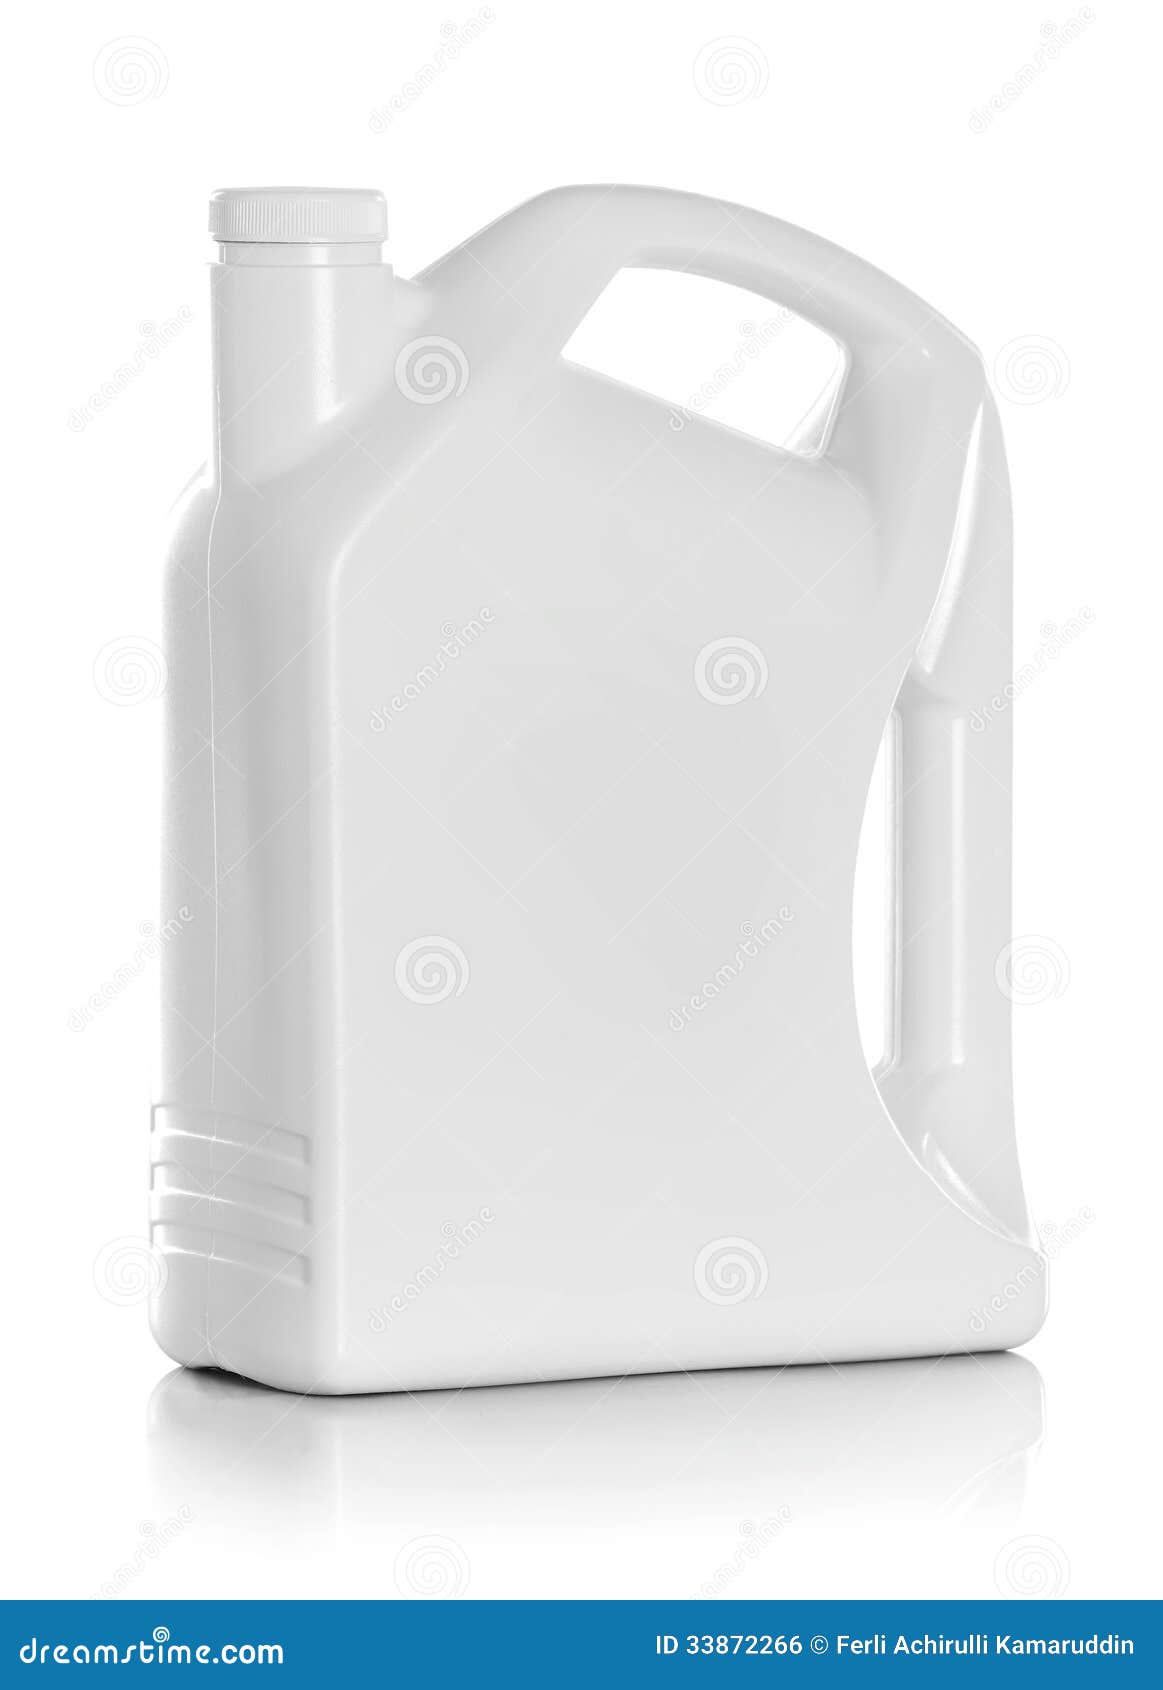 Download 578 Plastic Jerry Can Photos Free Royalty Free Stock Photos From Dreamstime Yellowimages Mockups